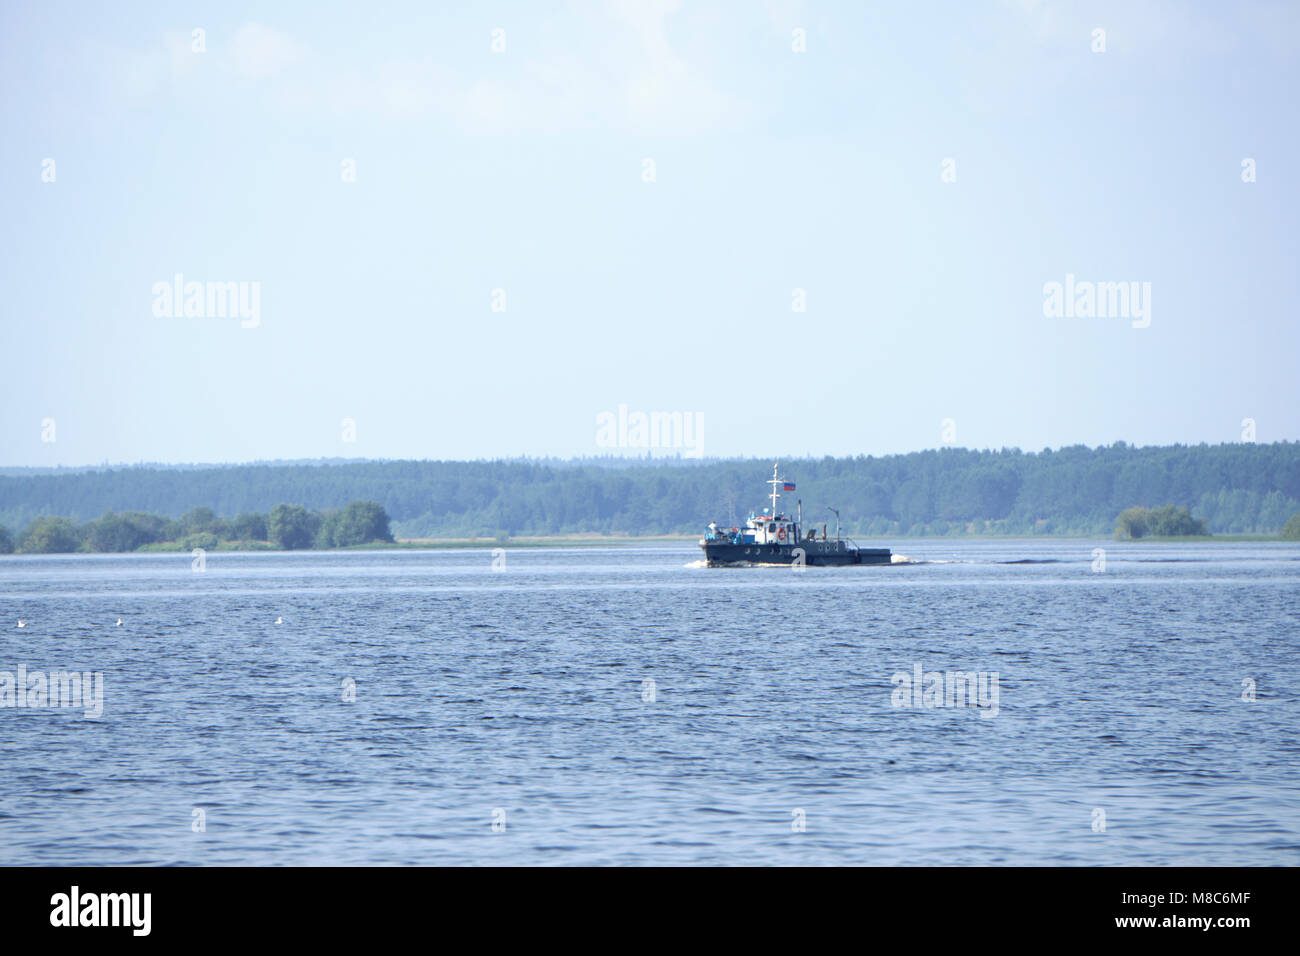 tugboat pushes sand debris along the river Stock Photo